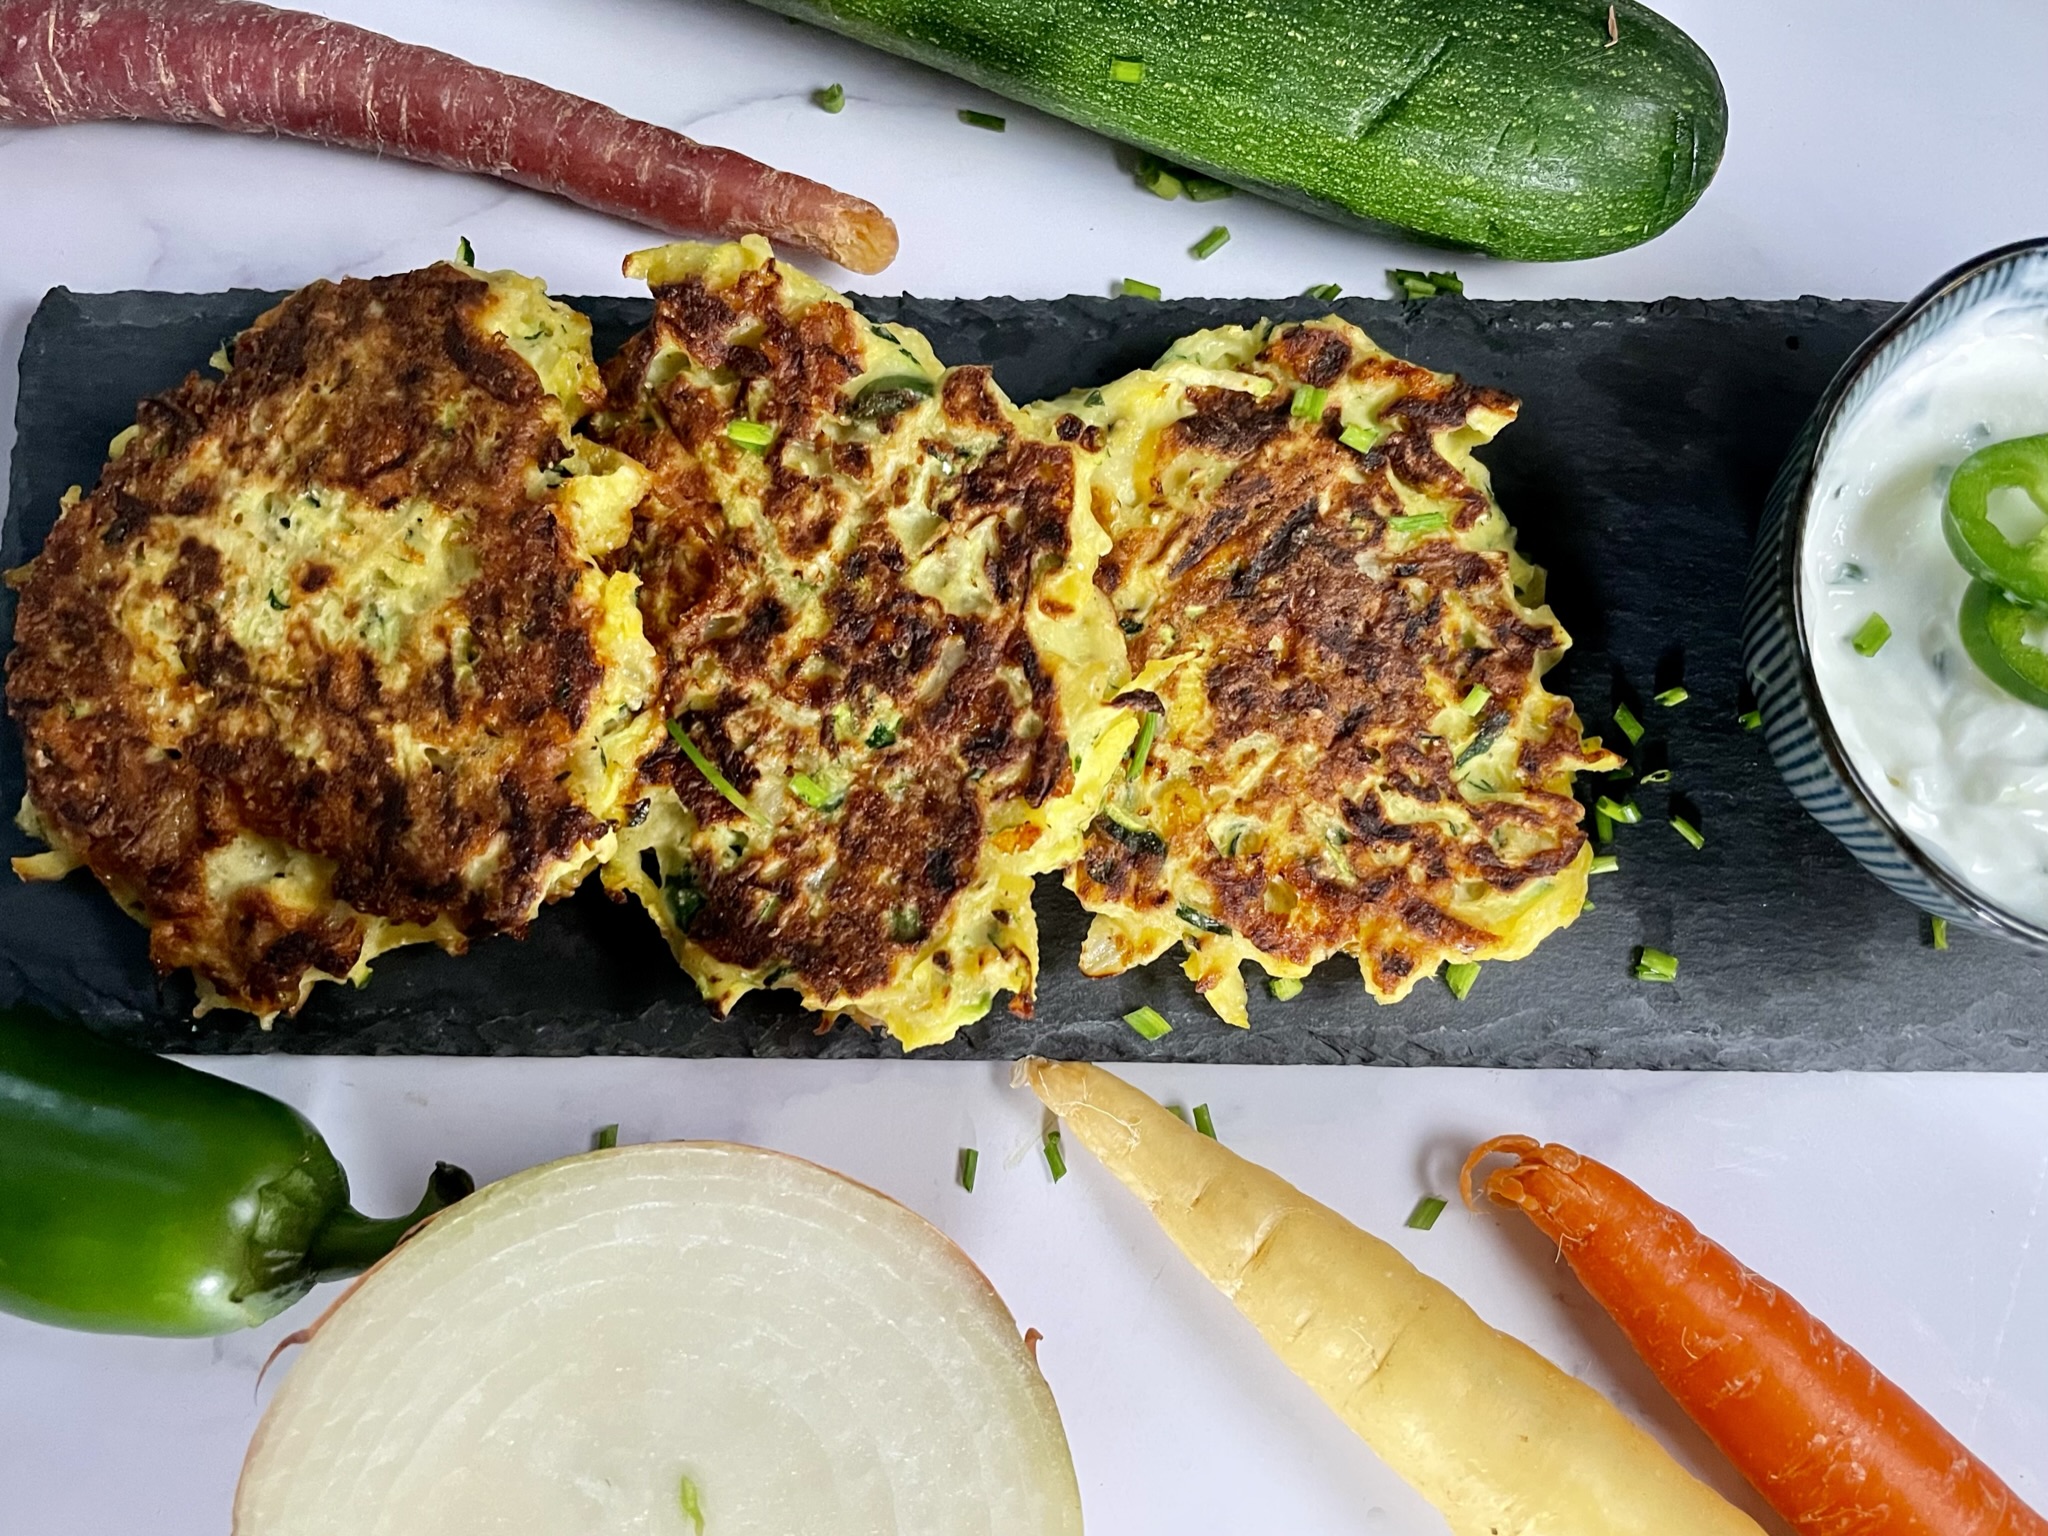 High protein vegetable patties with chive yoghurt dip.